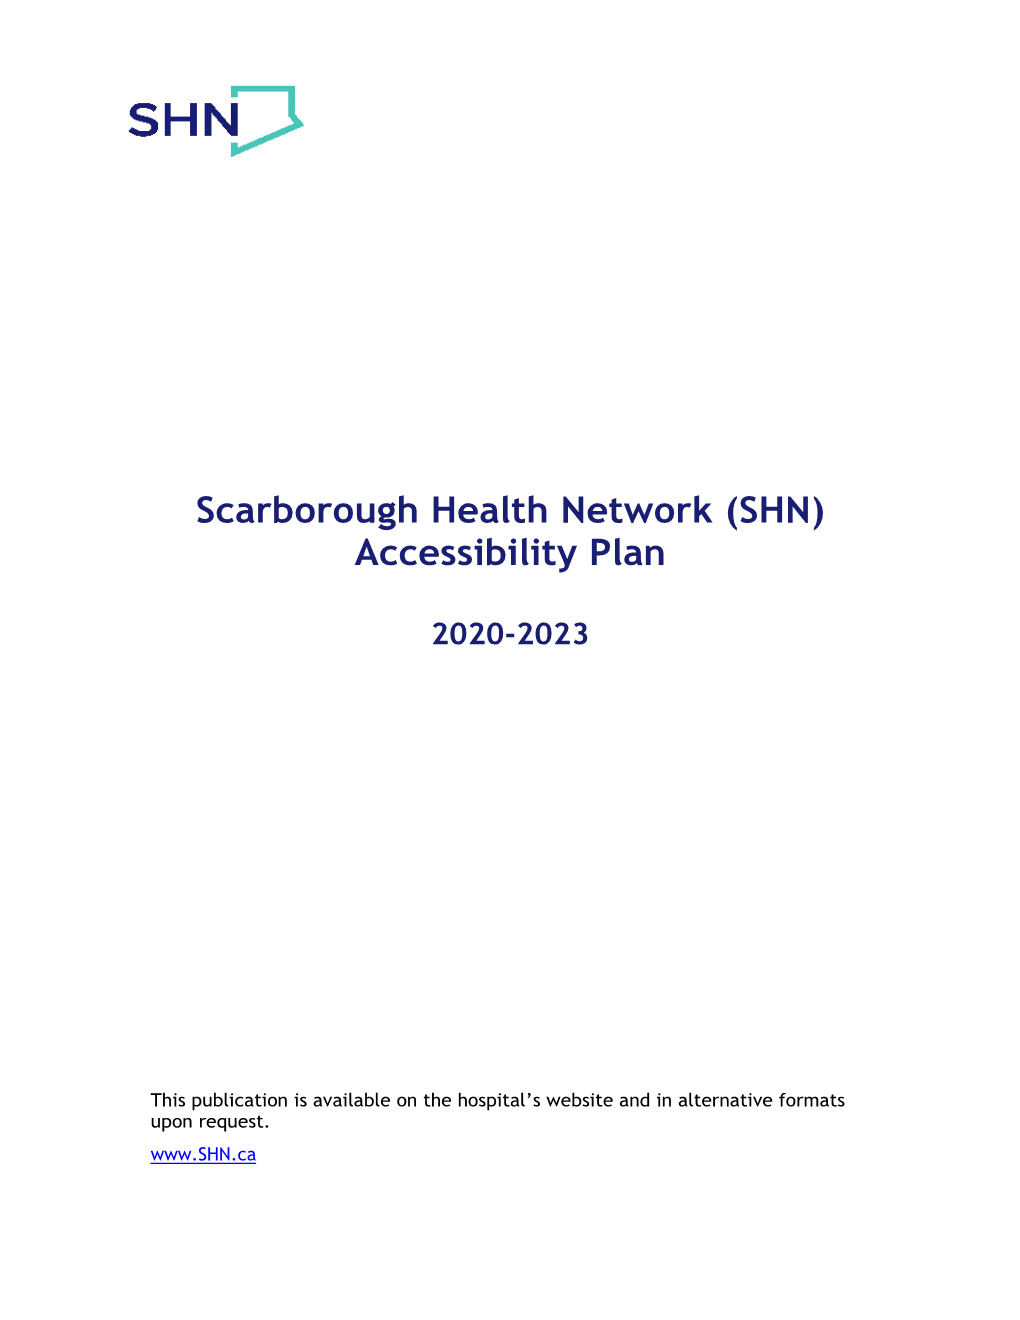 Scarborough Health Network (SHN) Accessibility Plan